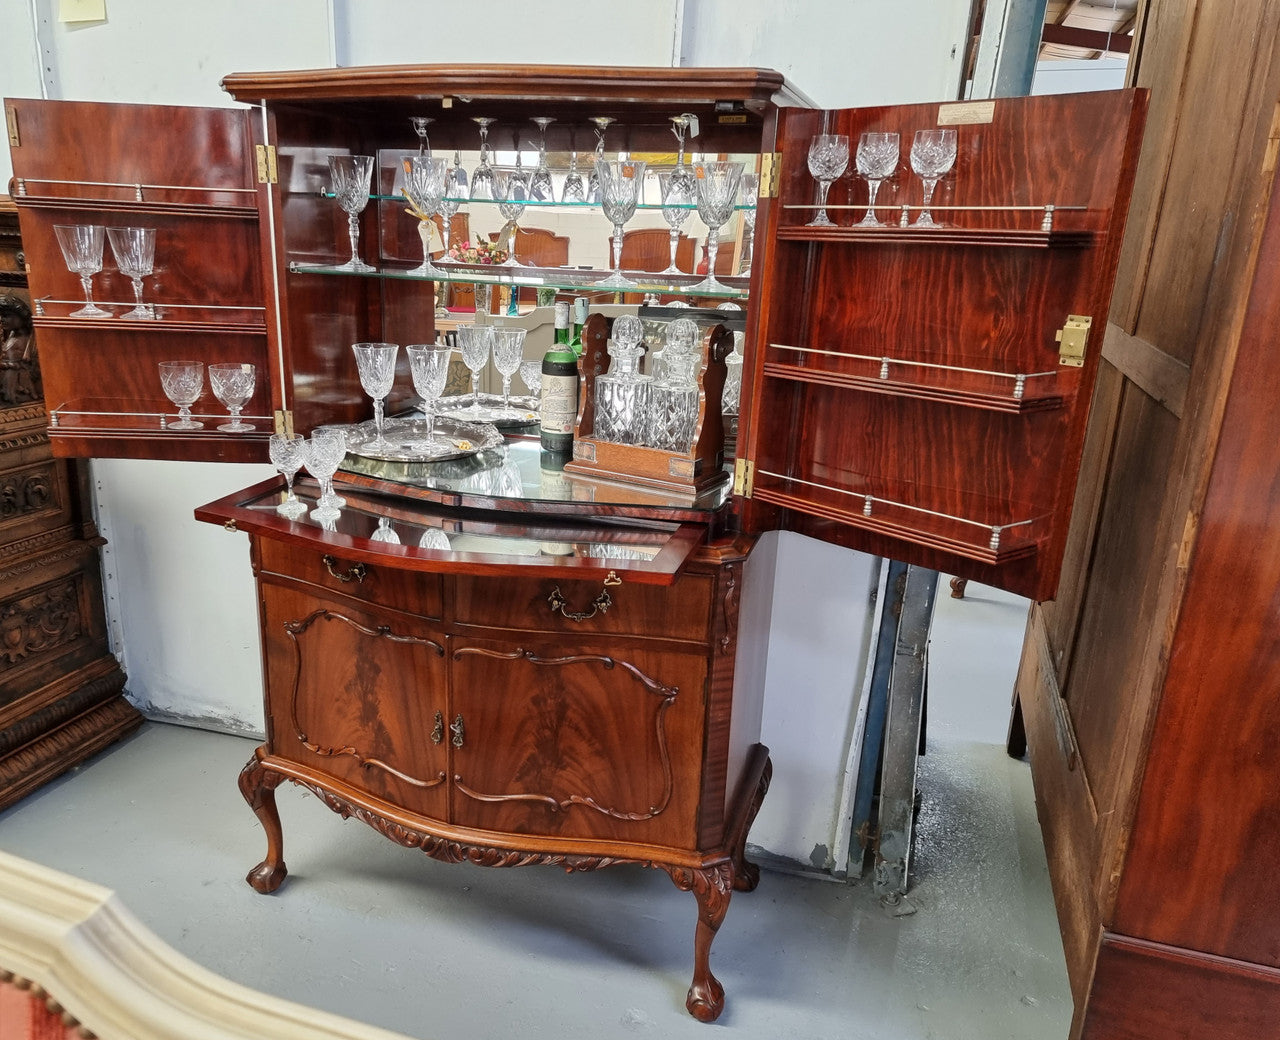 1950’s Chippendale Style Flame Mahogany Four door Bar. The top section has glass shelves and a mirrored pull out tray for storing glasses, decanters & serving etc. It also has a silver presentation plaque to the Mayor of Hawthorn 1958. The bottom section is for storage bottles etc. A stunning and practical piece.